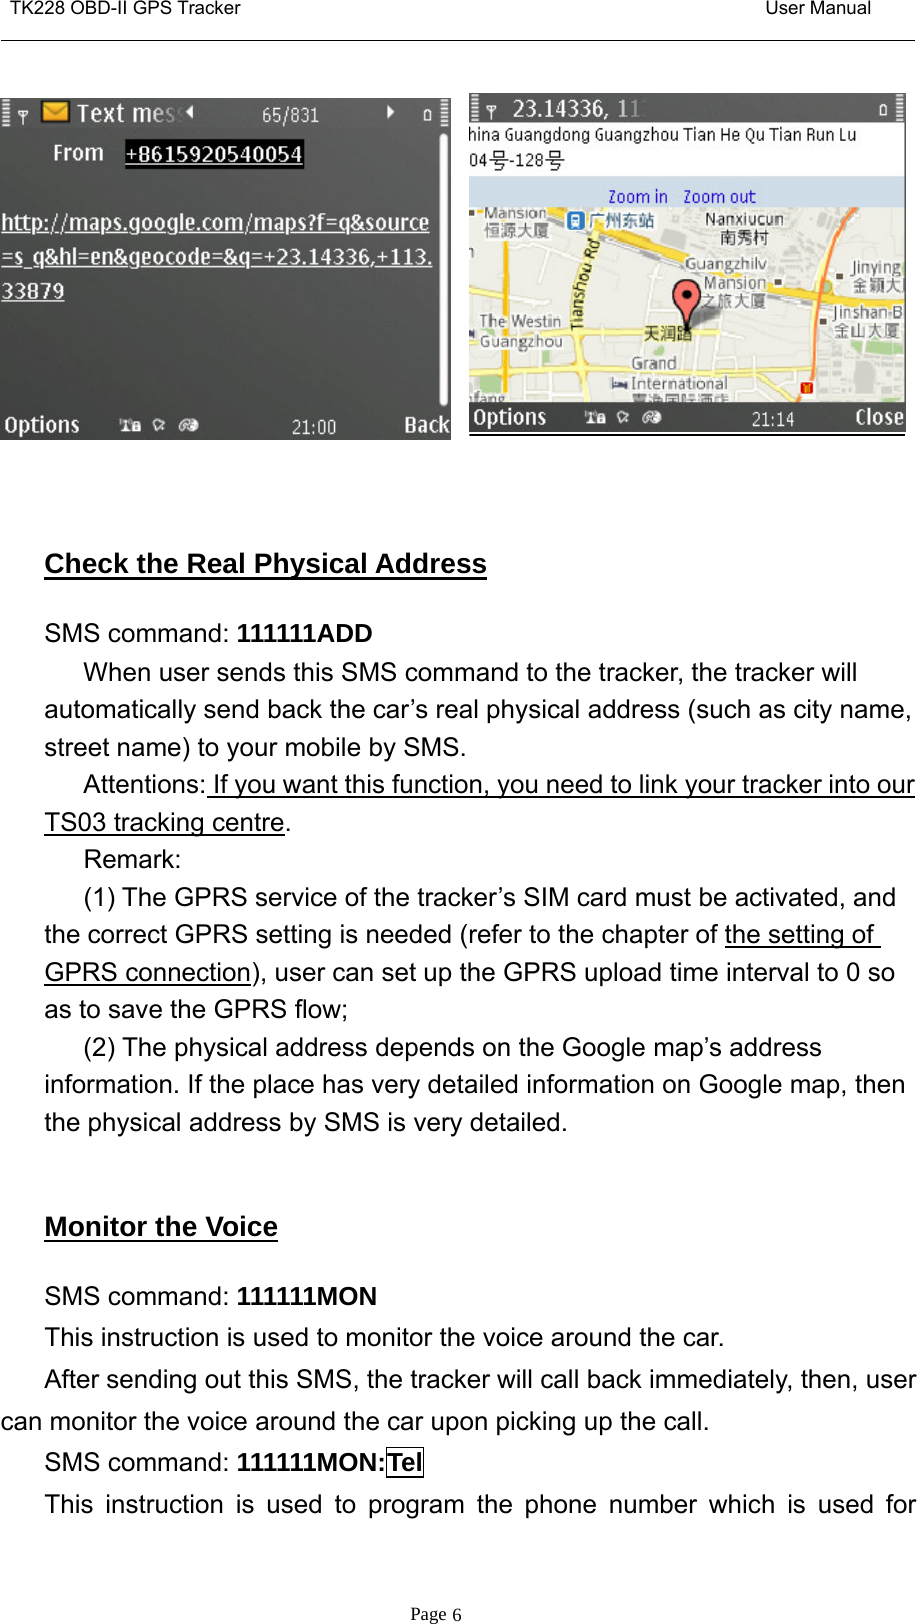 TK228 OBD-II GPS Tracker User ManualPage 6Check the Real Physical AddressSMS command: 111111ADDWhen user sends this SMS command to the tracker, the tracker willautomatically send back the car’s real physical address (such as city name,street name) to your mobile by SMS.Attentions: If you want this function, you need to link your tracker into ourTS03 tracking centre.Remark:(1) The GPRS service of the tracker’s SIM card must be activated, andthe correct GPRS setting is needed (refer to the chapter of the setting ofGPRS connection), user can set up the GPRS upload time interval to 0 soas to save the GPRS flow;(2) The physical address depends on the Google map’s addressinformation. If the place has very detailed information on Google map, thenthe physical address by SMS is very detailed.Monitor the VoiceSMS command: 111111MONThis instruction is used to monitor the voice around the car.After sending out this SMS, the tracker will call back immediately, then, usercan monitor the voice around the car upon picking up the call.SMS command: 111111MON:TelThis instruction is used to program the phone number which is used for